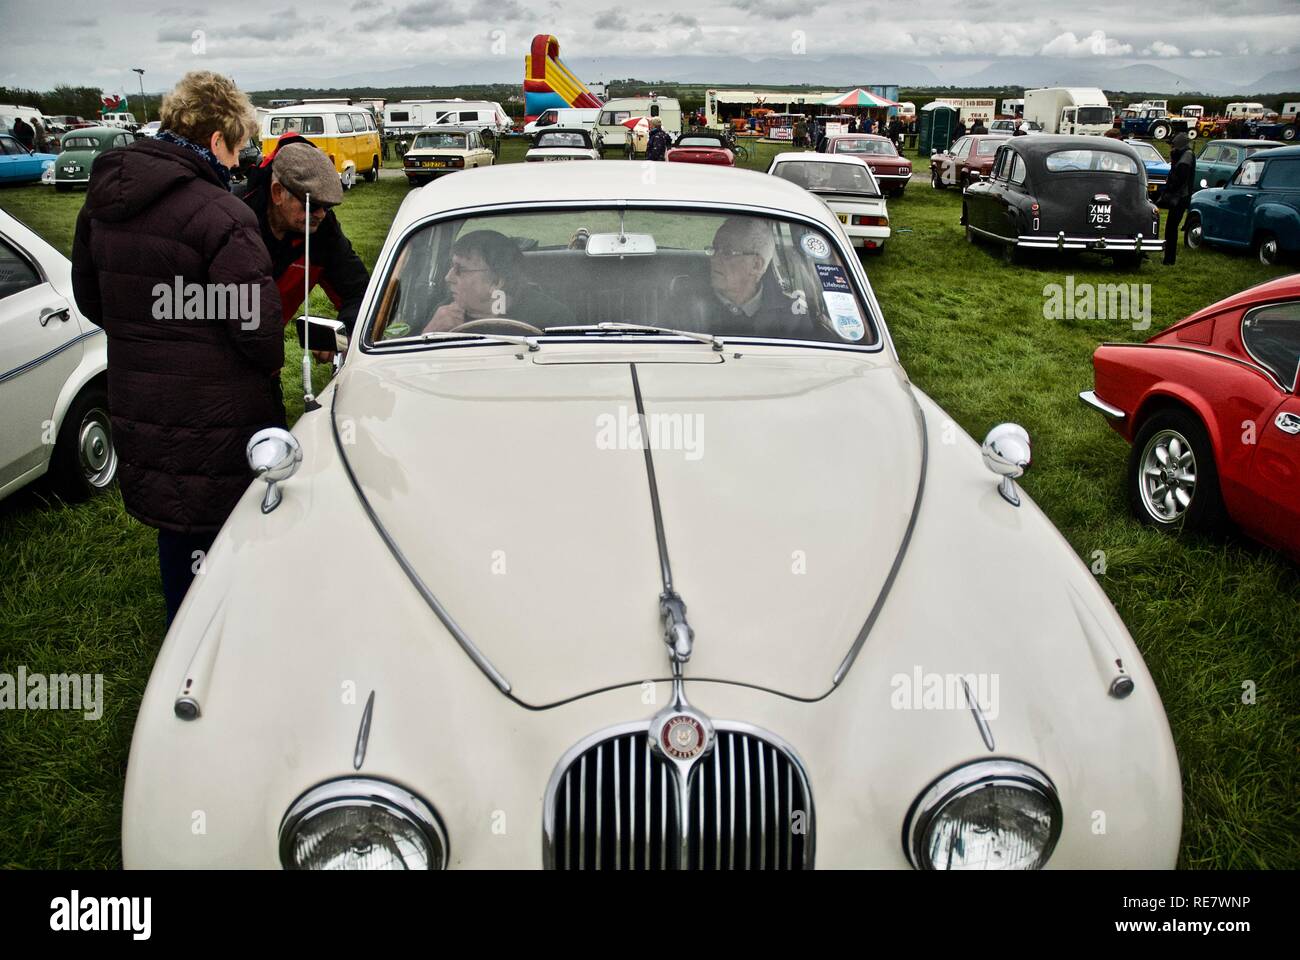 A 1968 Jaguar MkII 3.8ltr saloon at the Anglesey Vintage Rally, Anglesey, North Wales, UK, May 2015 Stock Photo